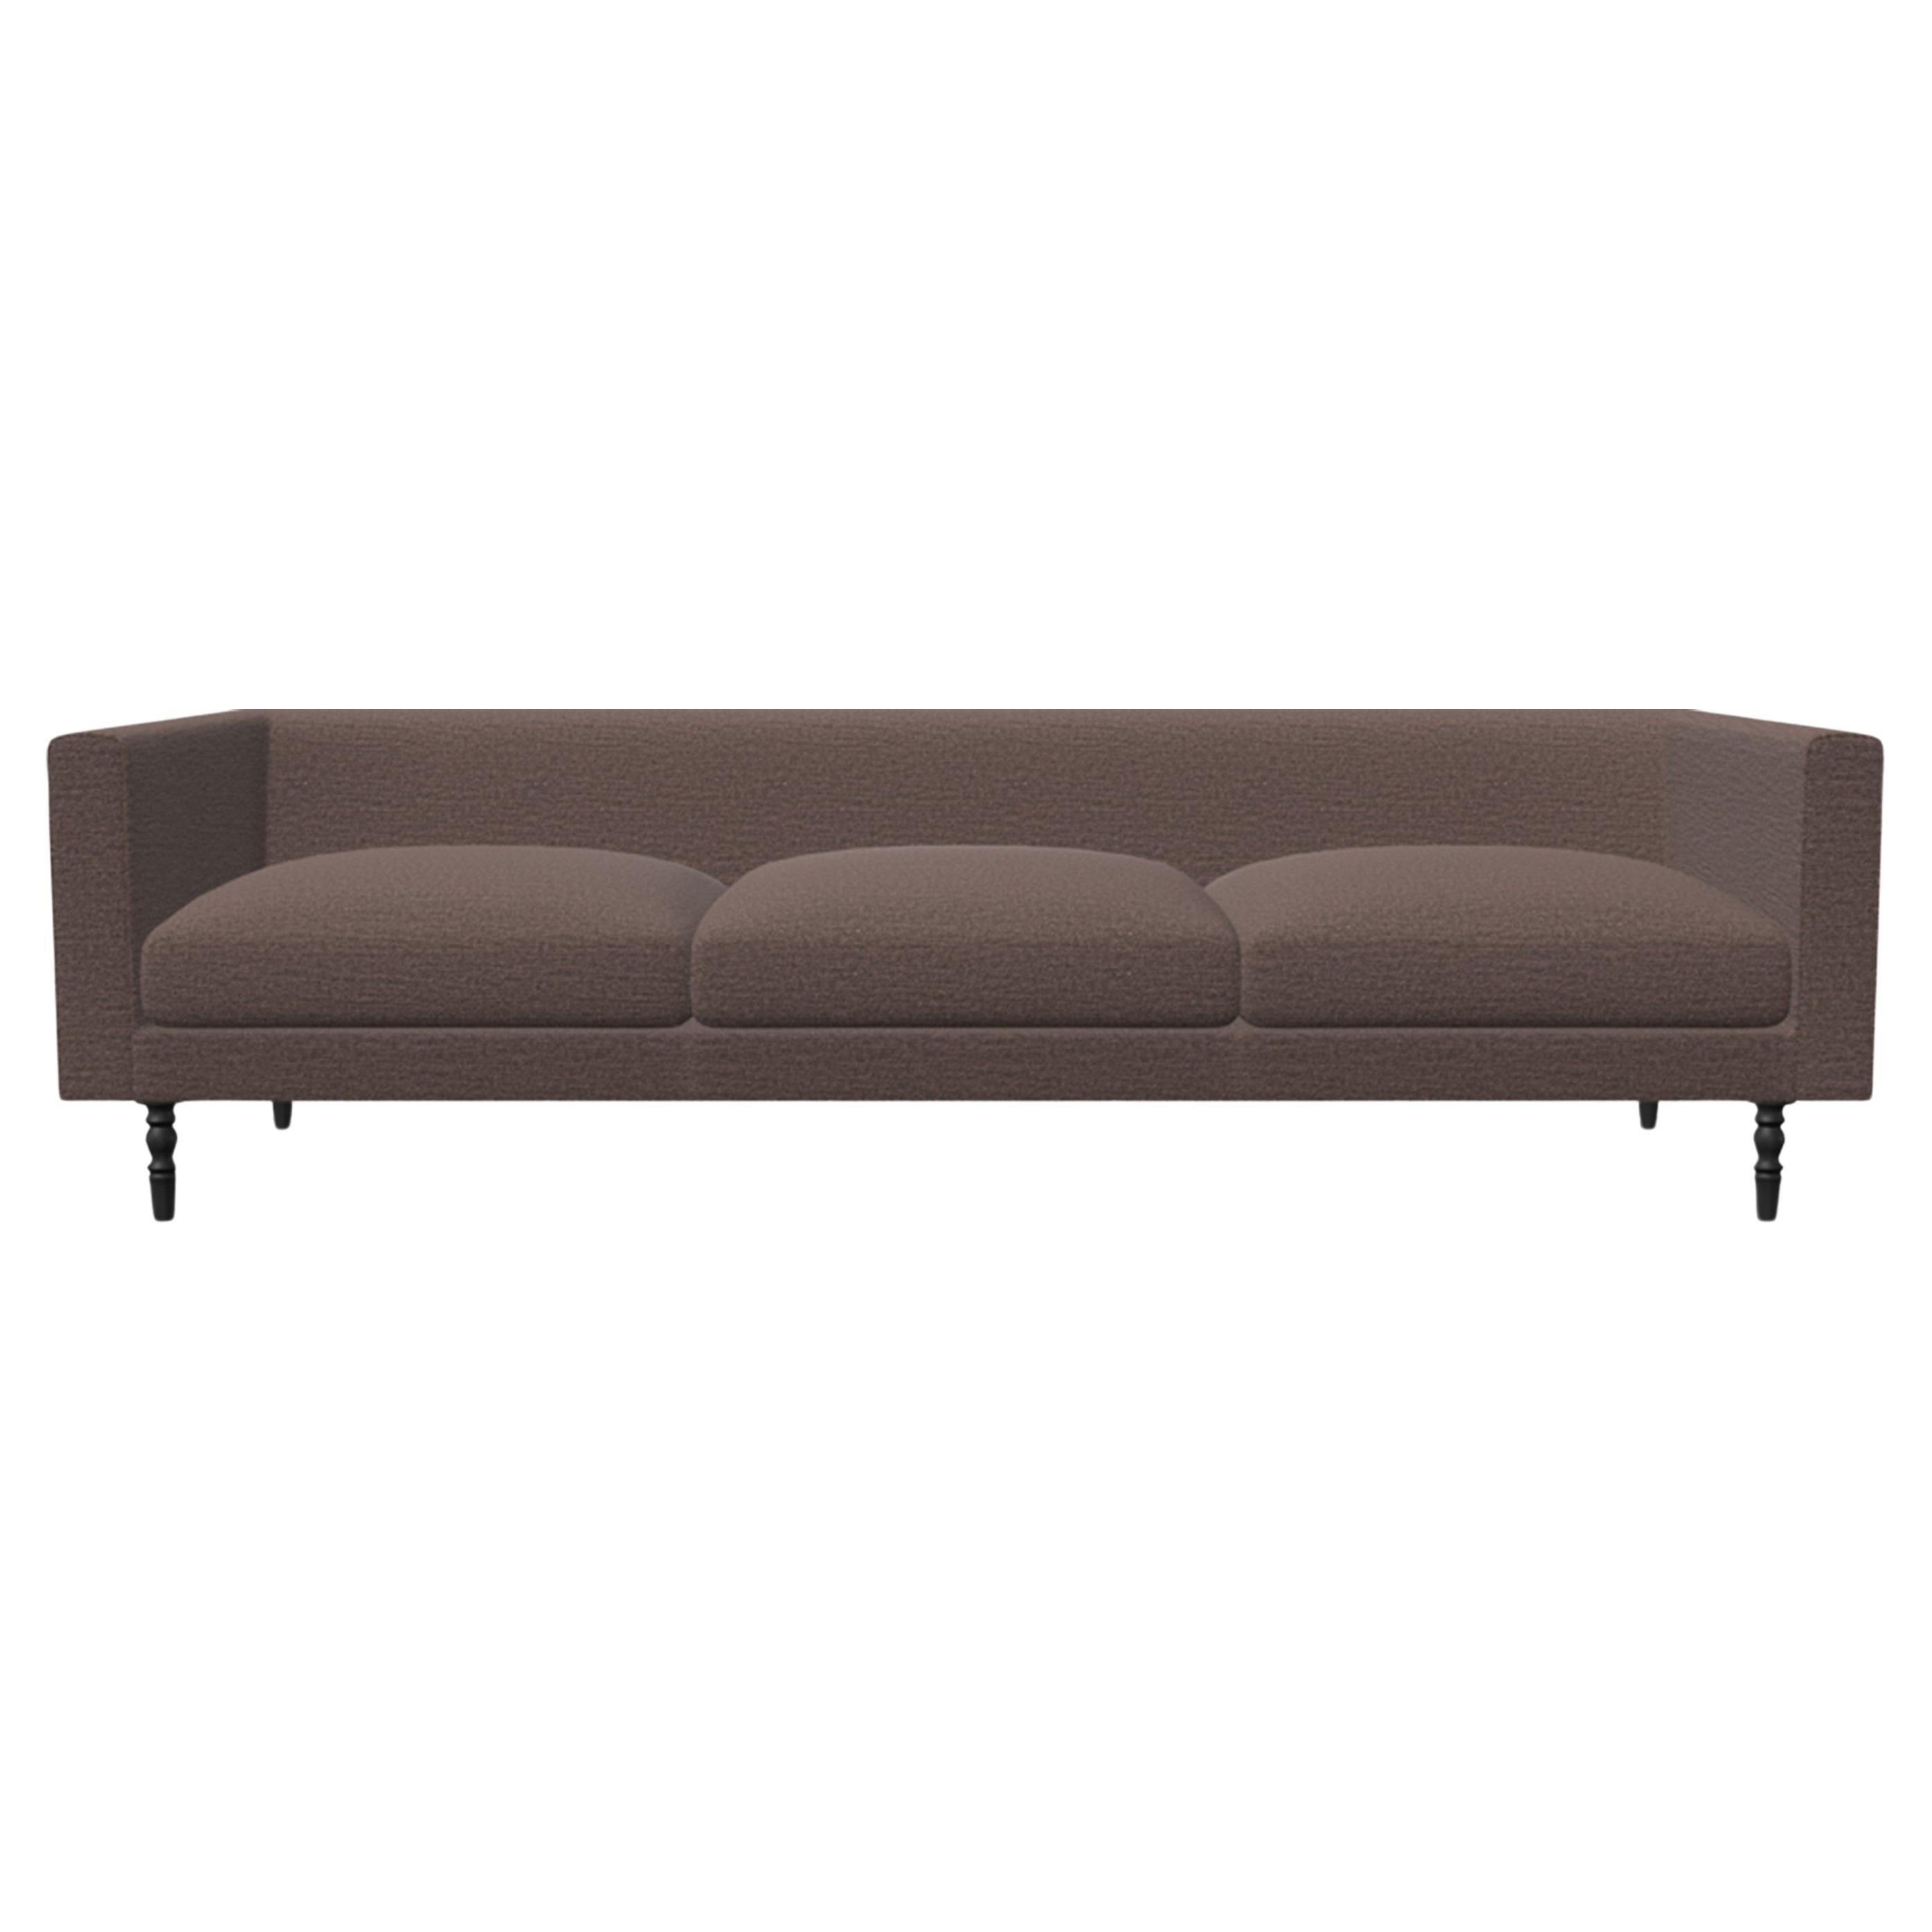 Moooi Boutique 3-Seat Sofa in Divina 3, 393 Upholstery with Pawn Legs